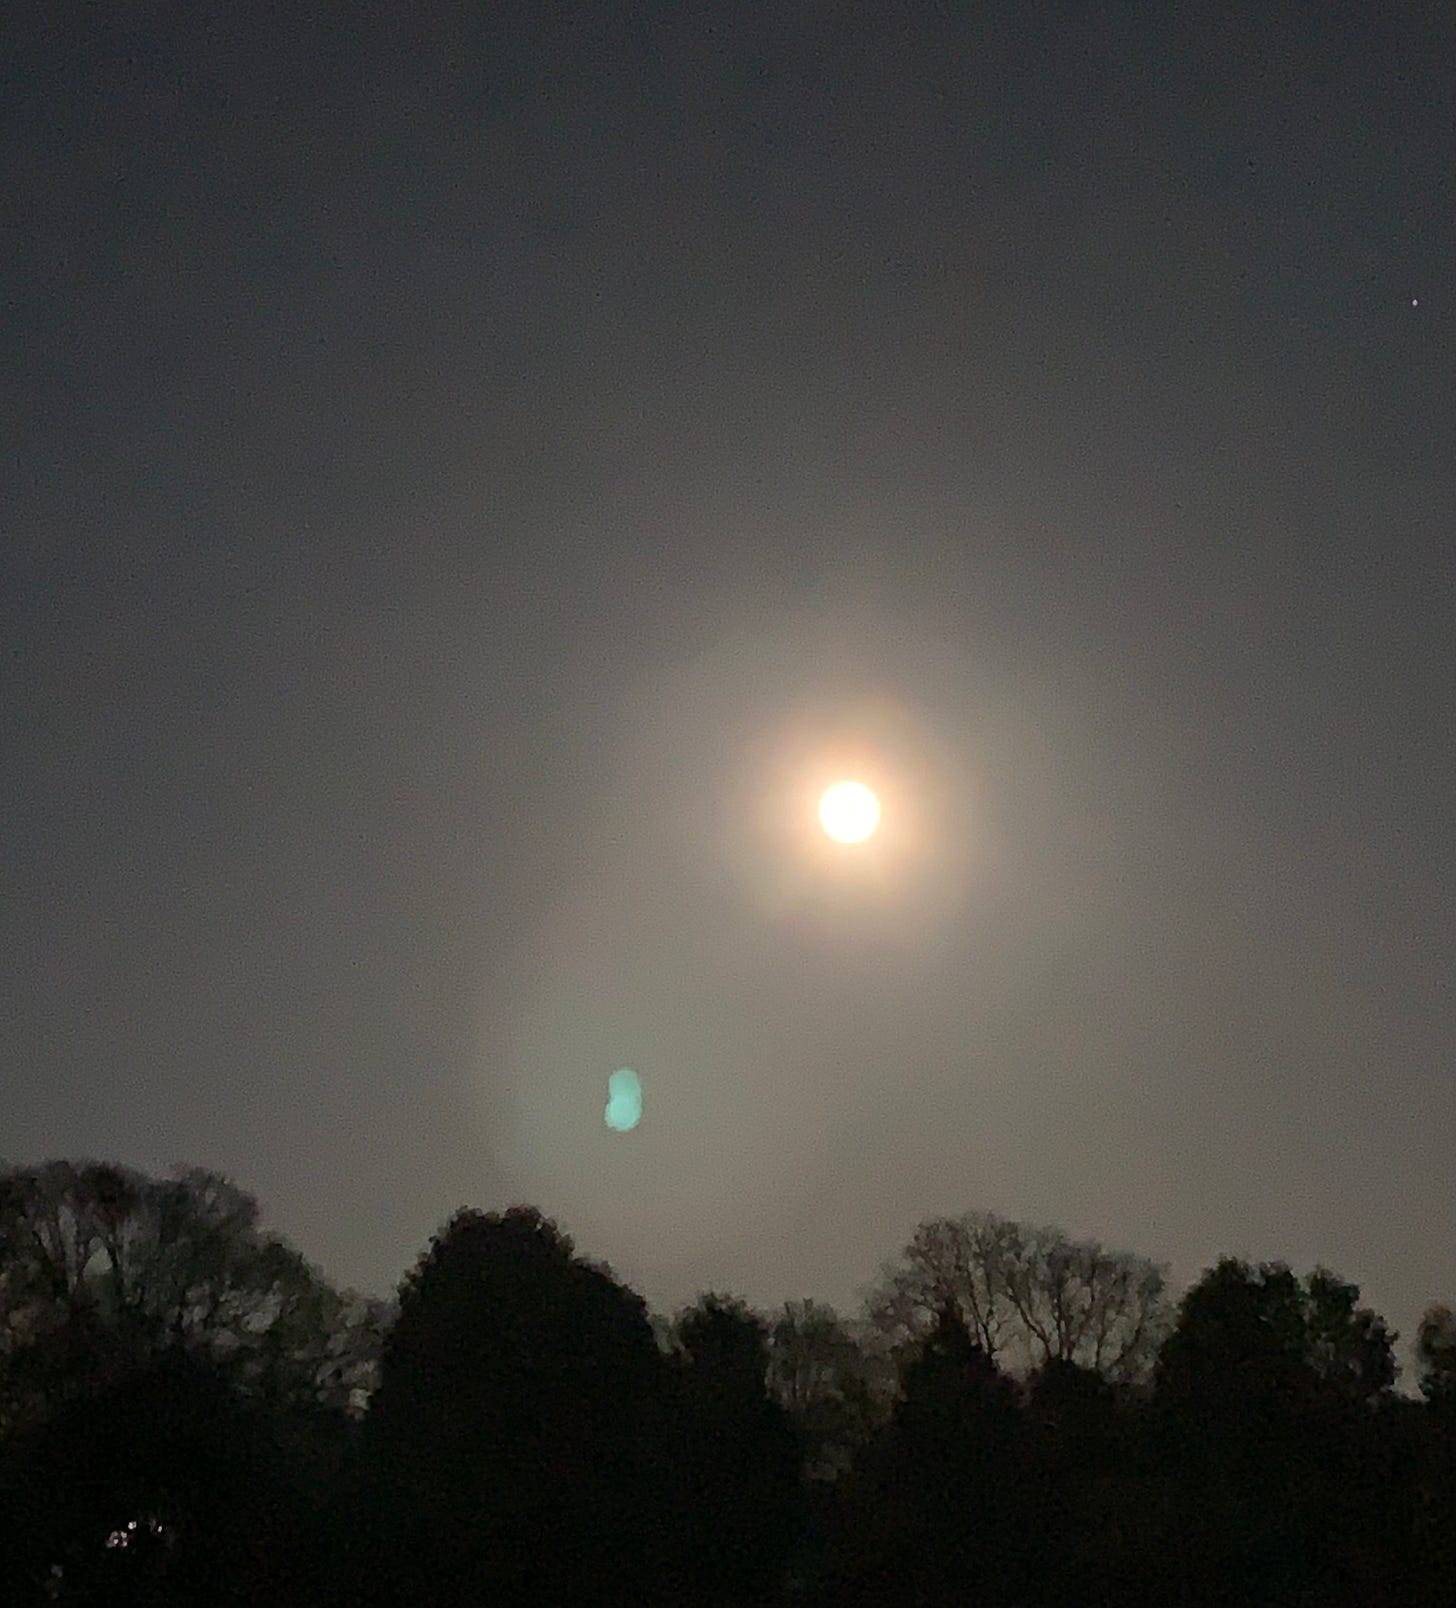 blurry image of the full moon illuminating the sky over trees